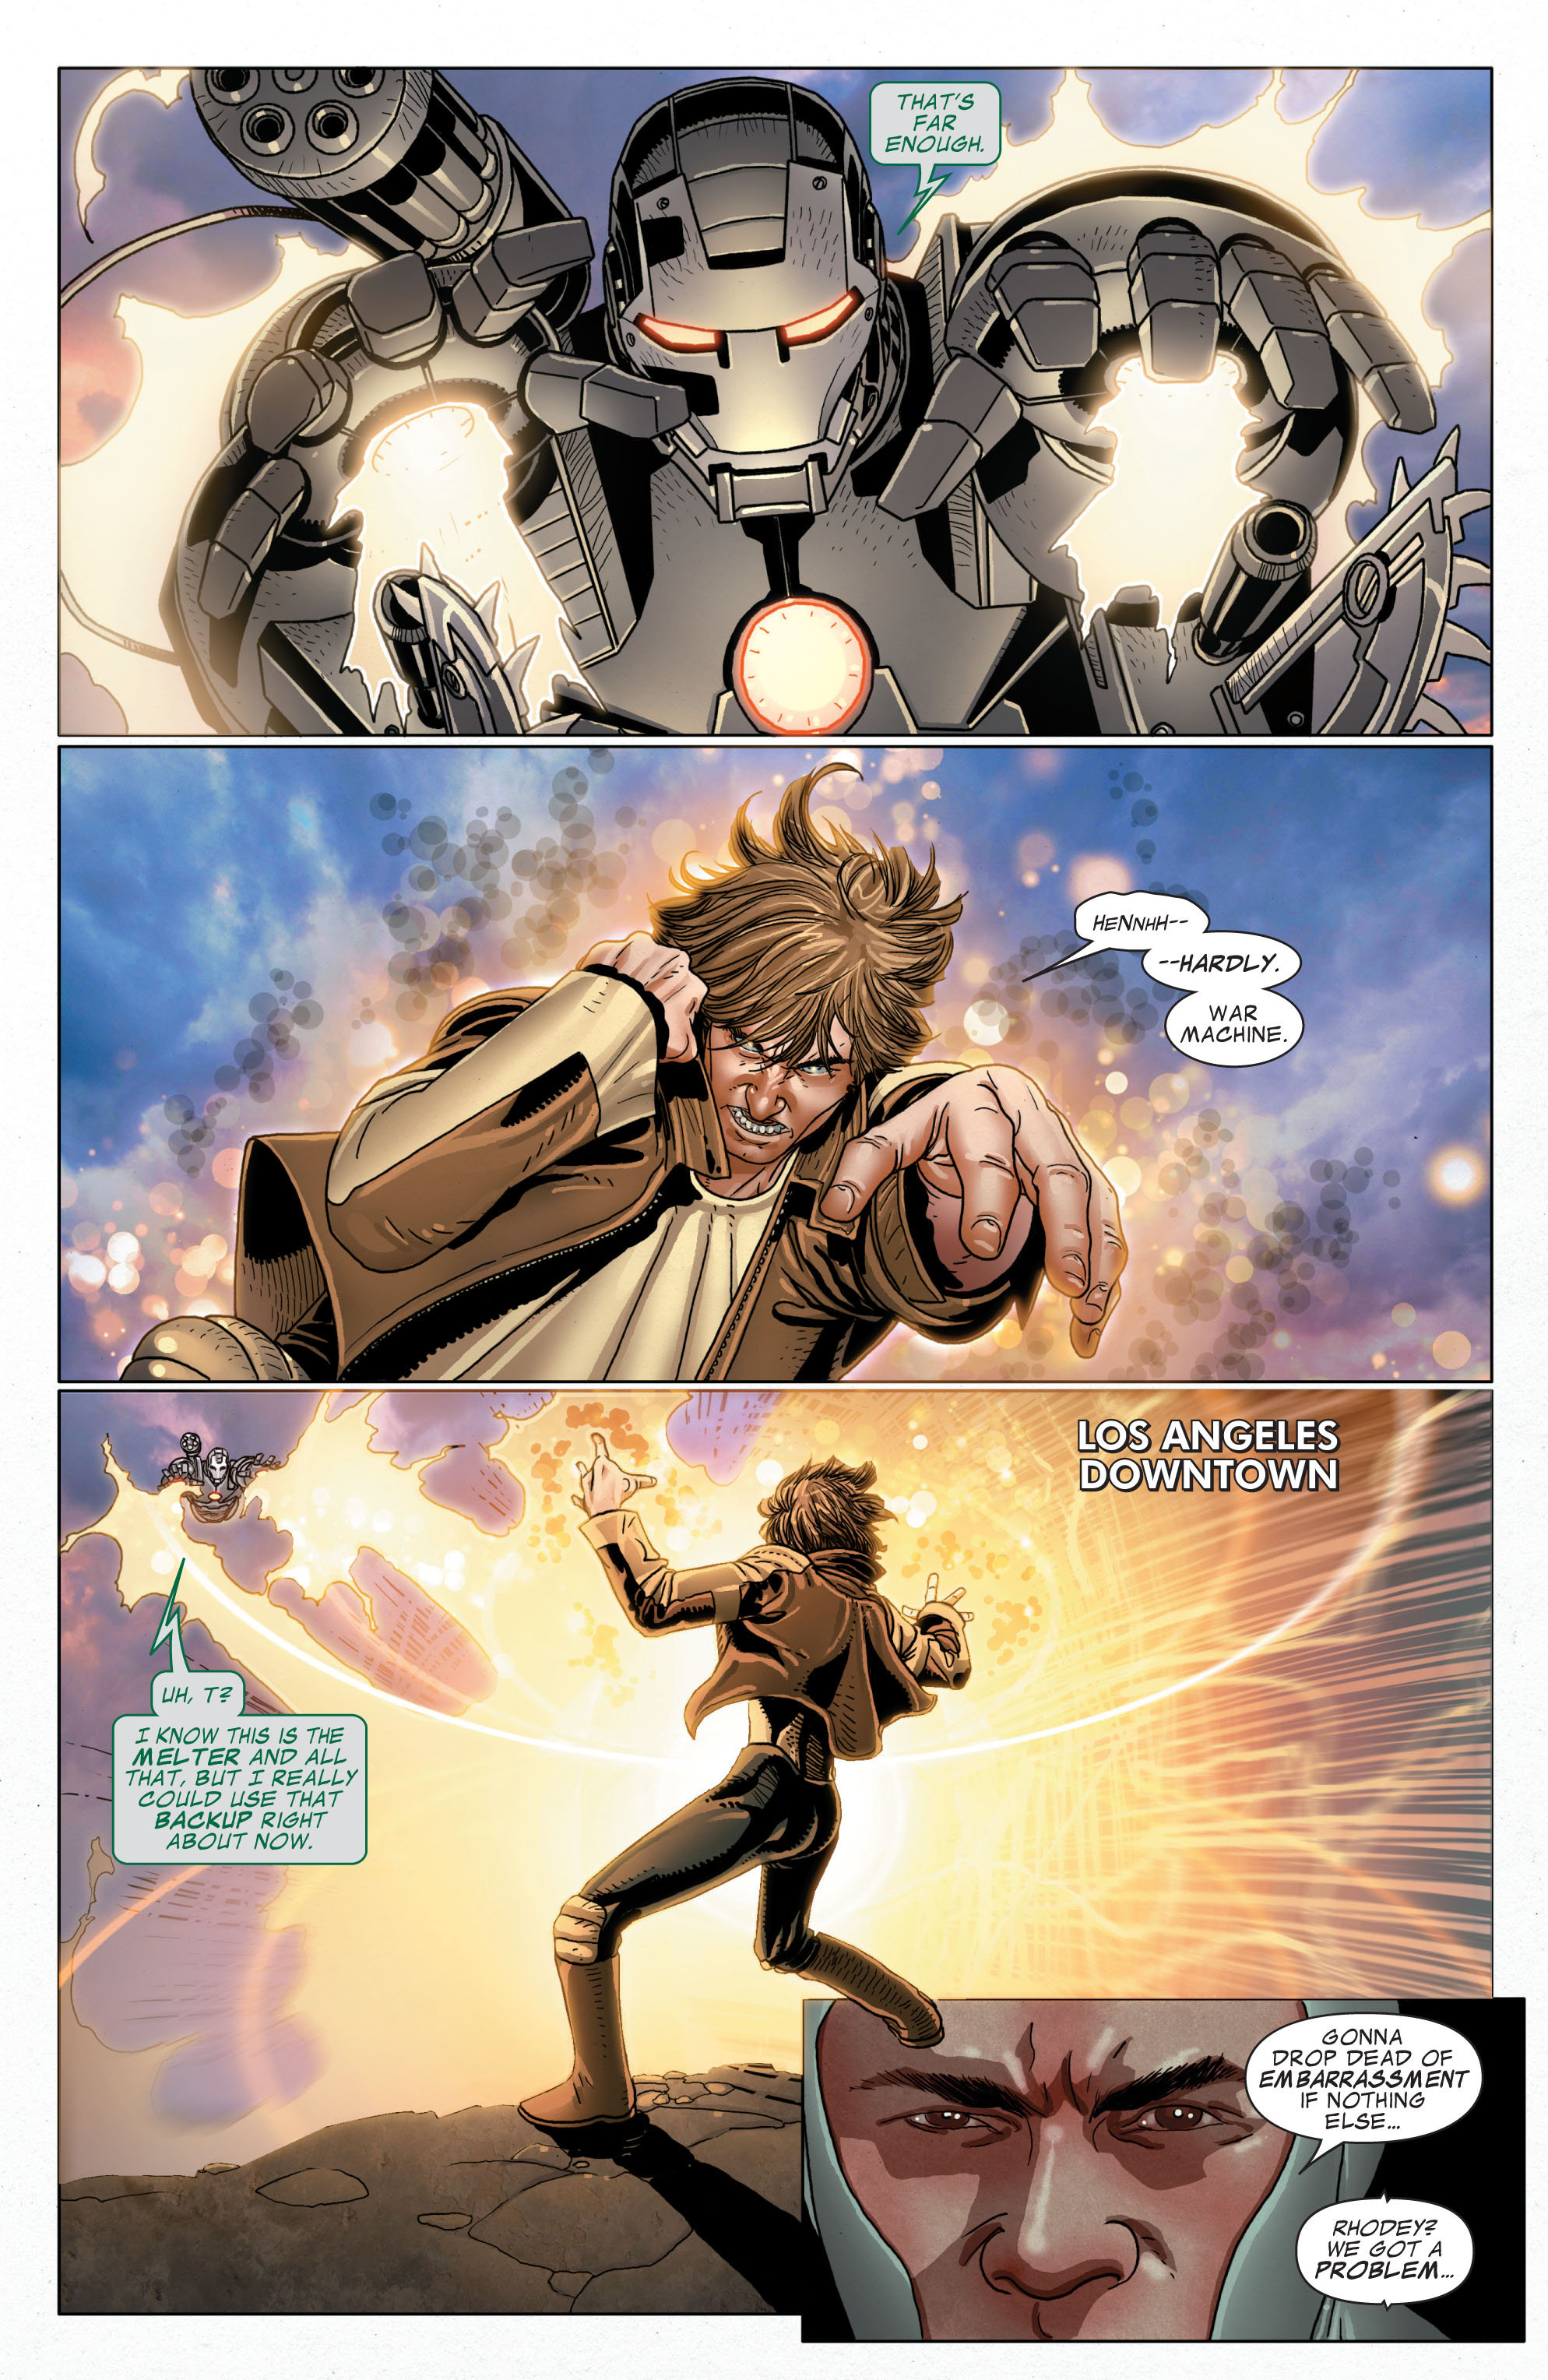 Invincible Iron Man (2008) 515 Page 2